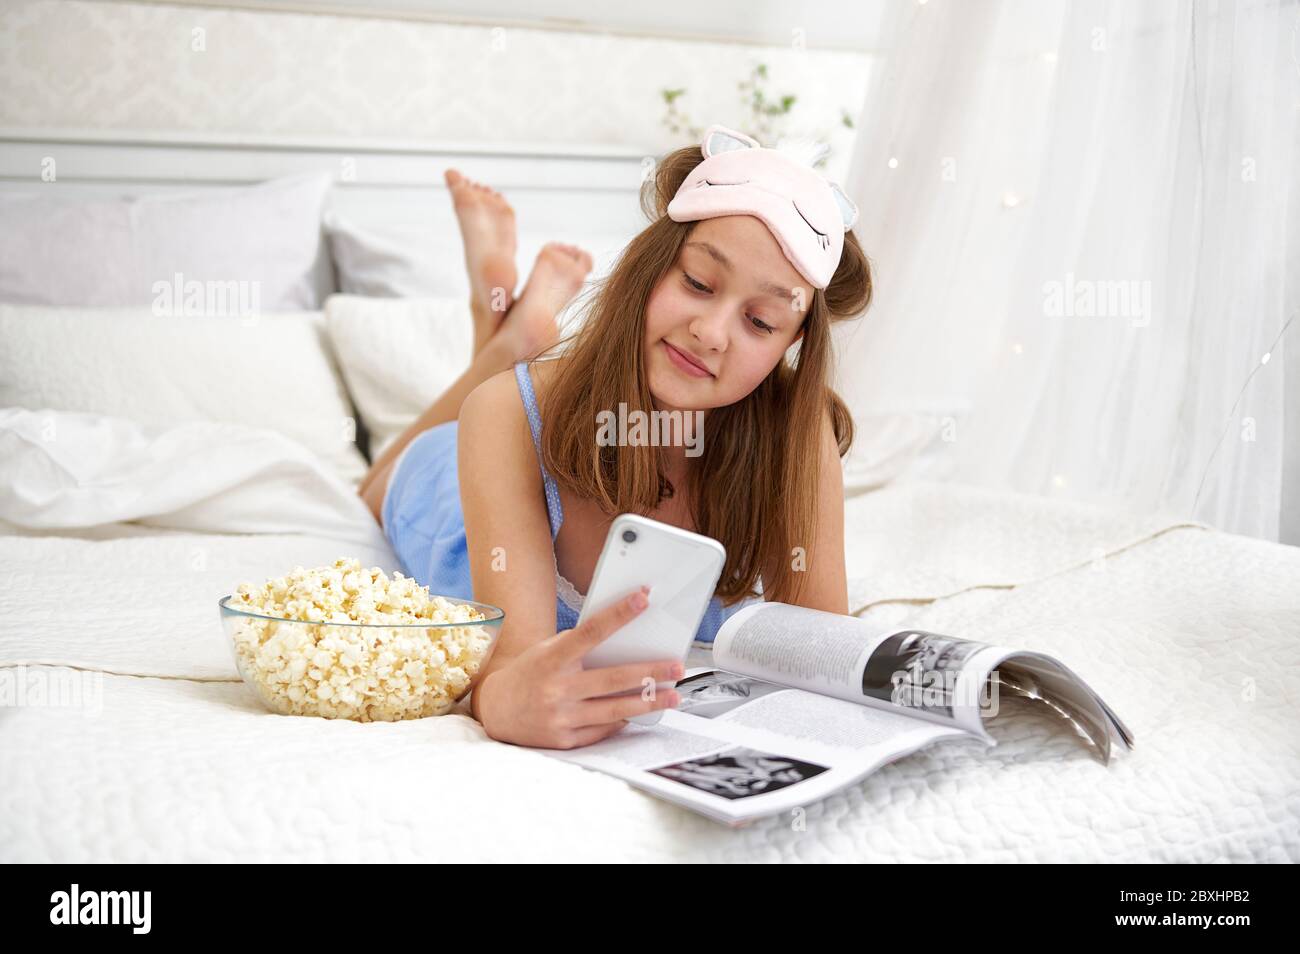 A young girl lies in bed after sleeping and browses social networks on the phone. Free time outside of school. Quarantine life. Stock Photo